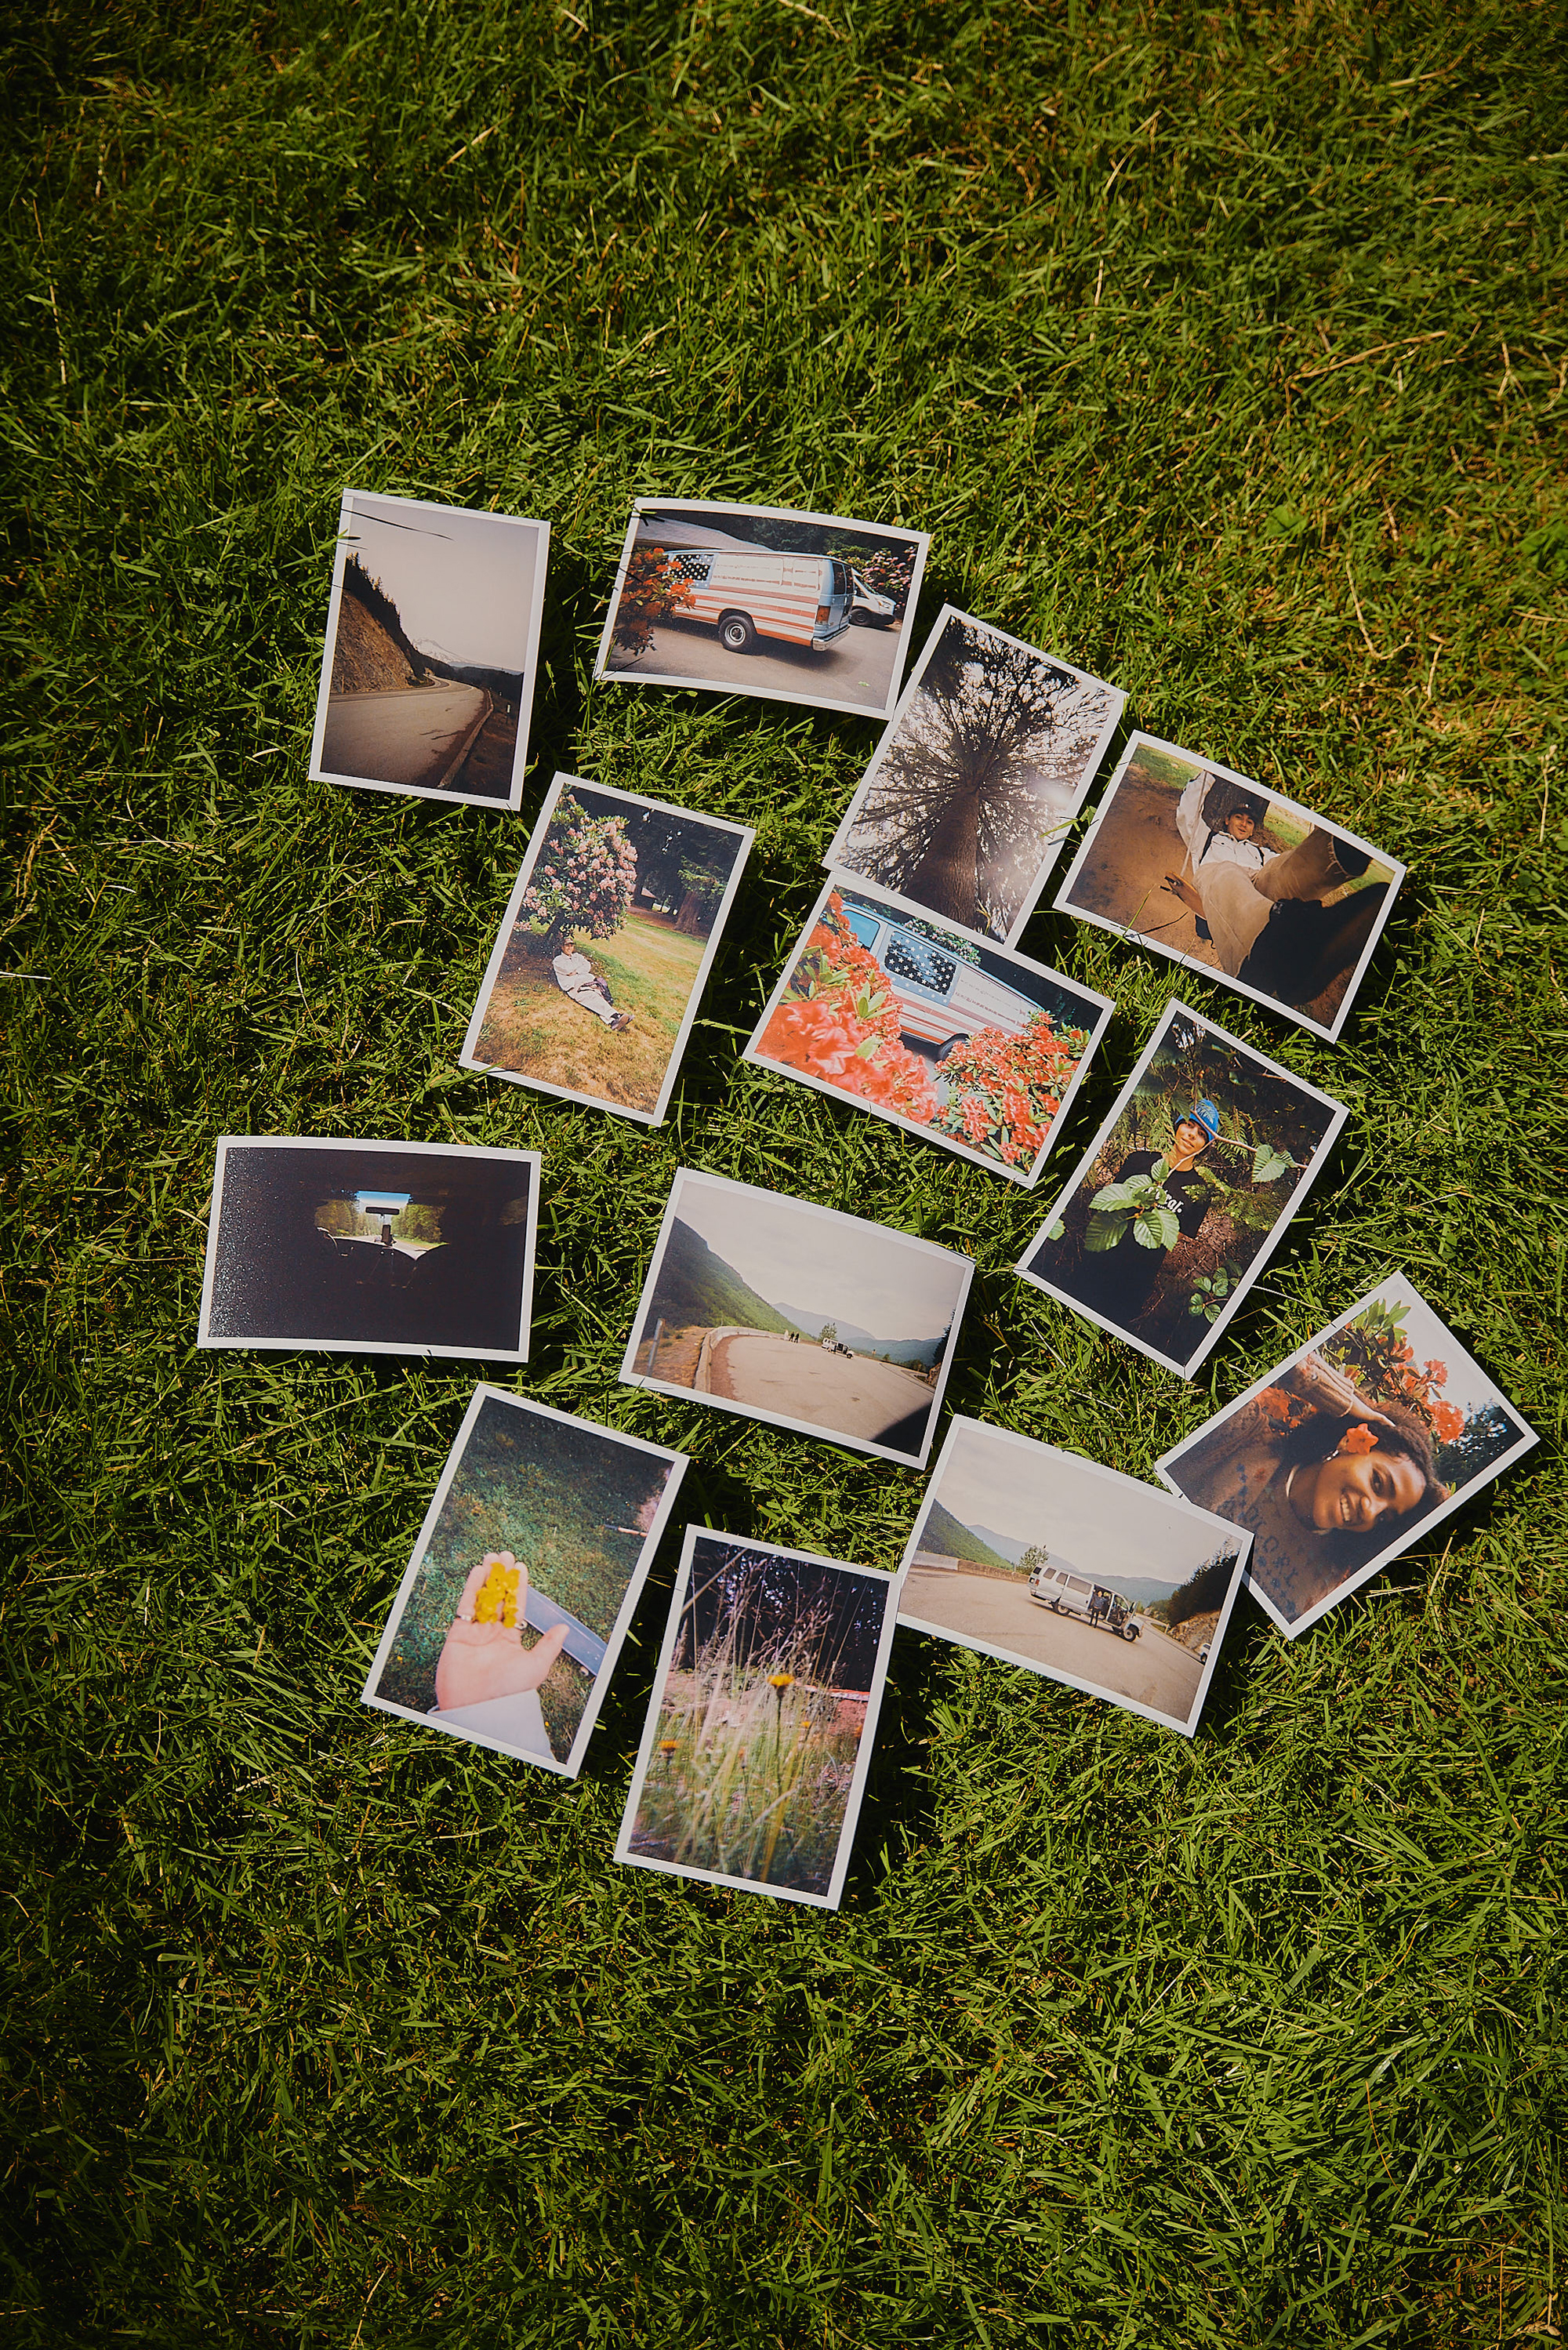 18 printed photos from campers